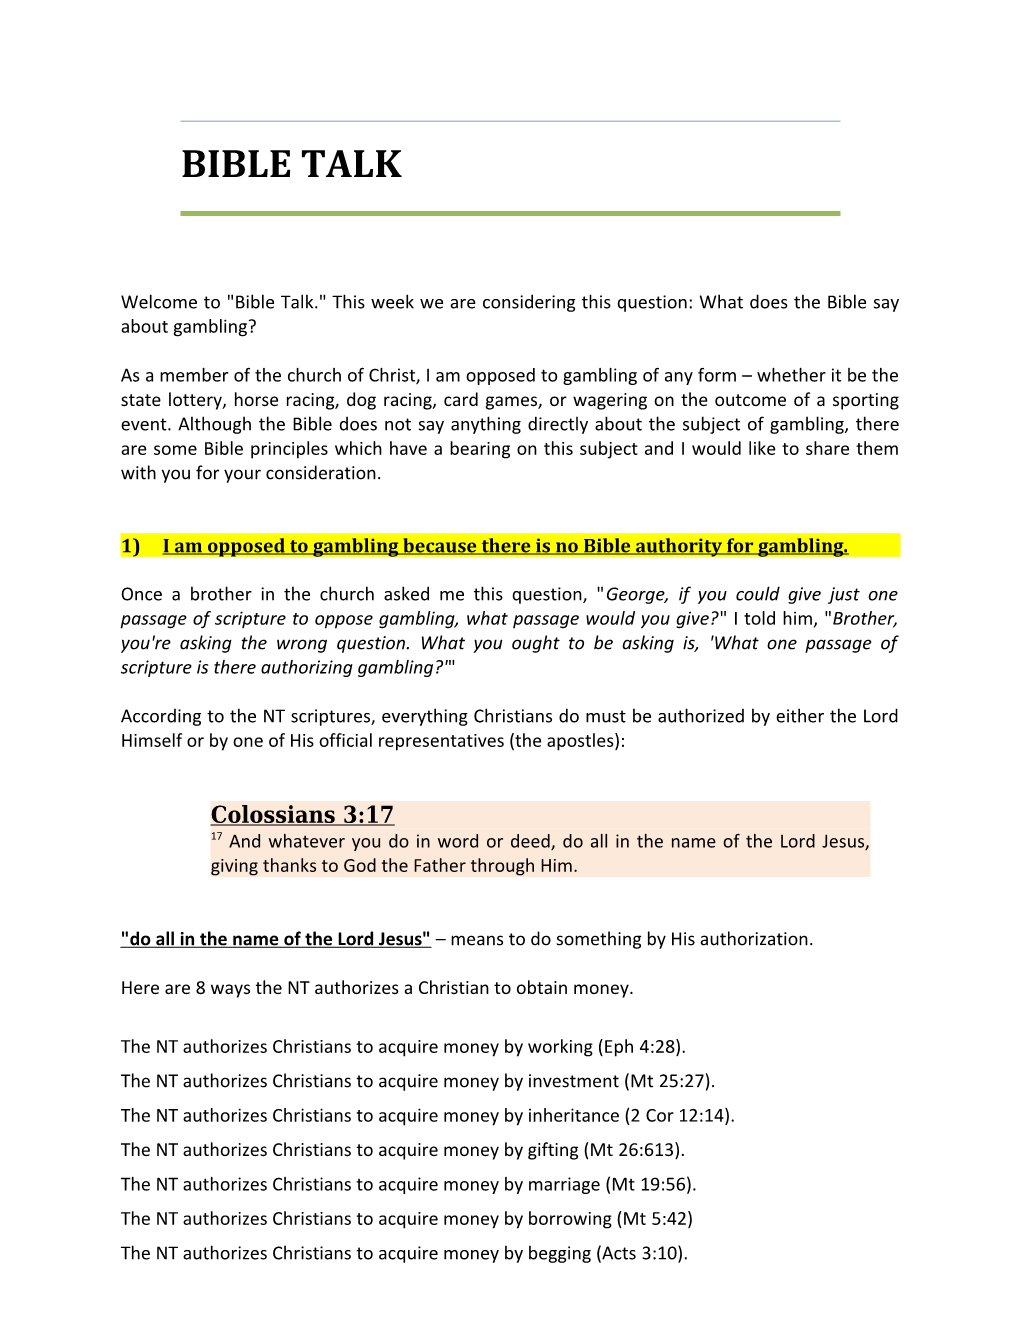 1)I Am Opposed to Gambling Because There Is No Bible Authority for Gambling